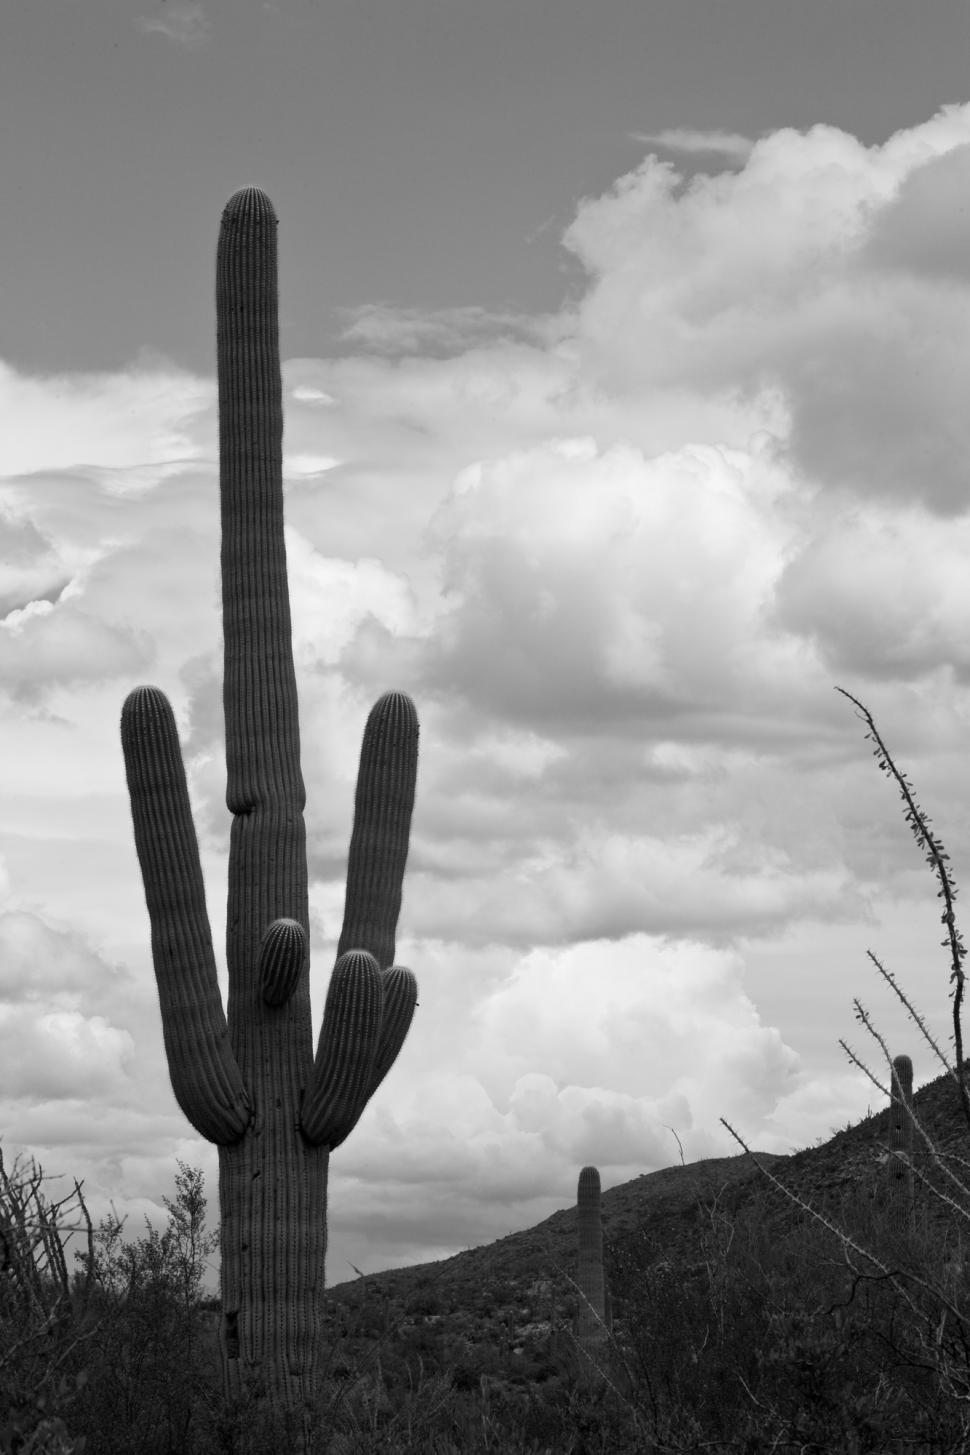 Free Image of Large Cactus in Black and White 